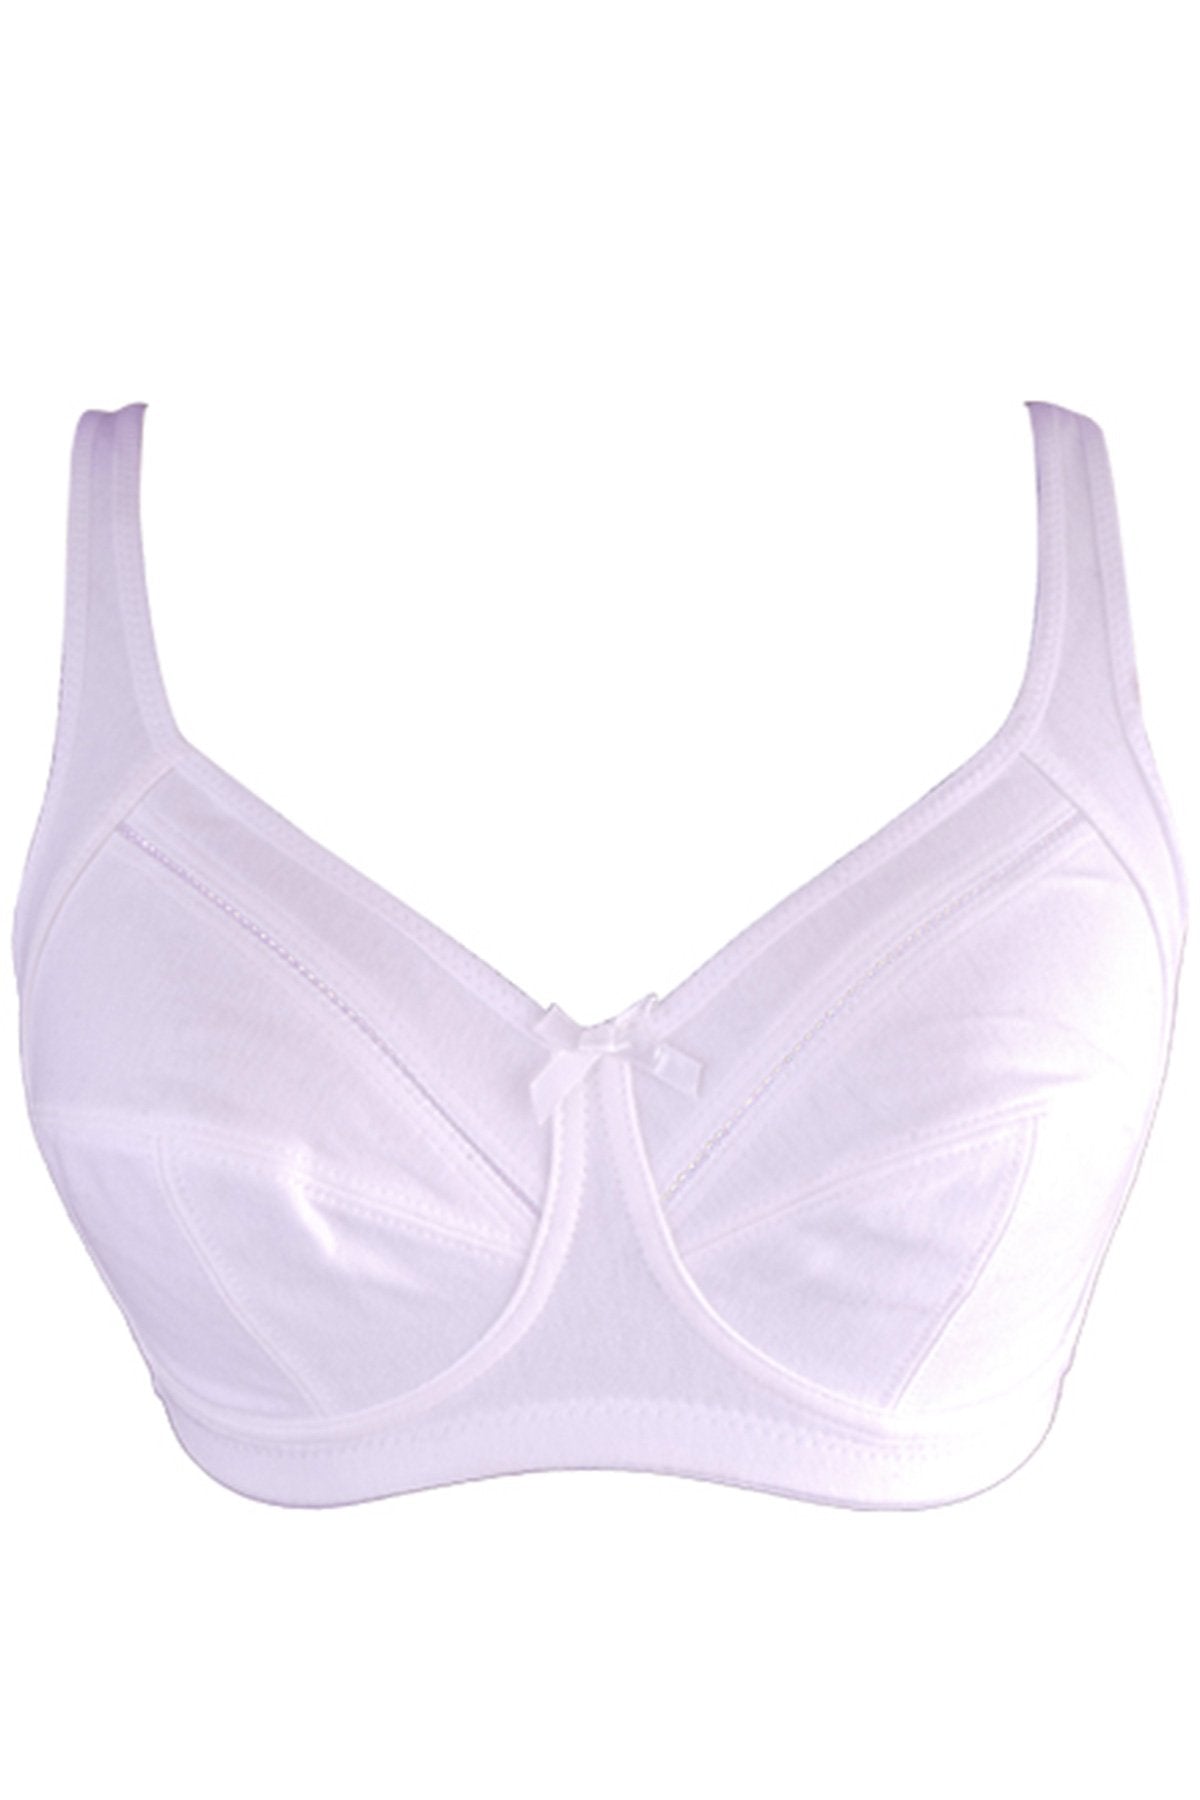 BLS - Clarise Non Wired And Non Padded Cotton Bra - Skin – Makeup City  Pakistan